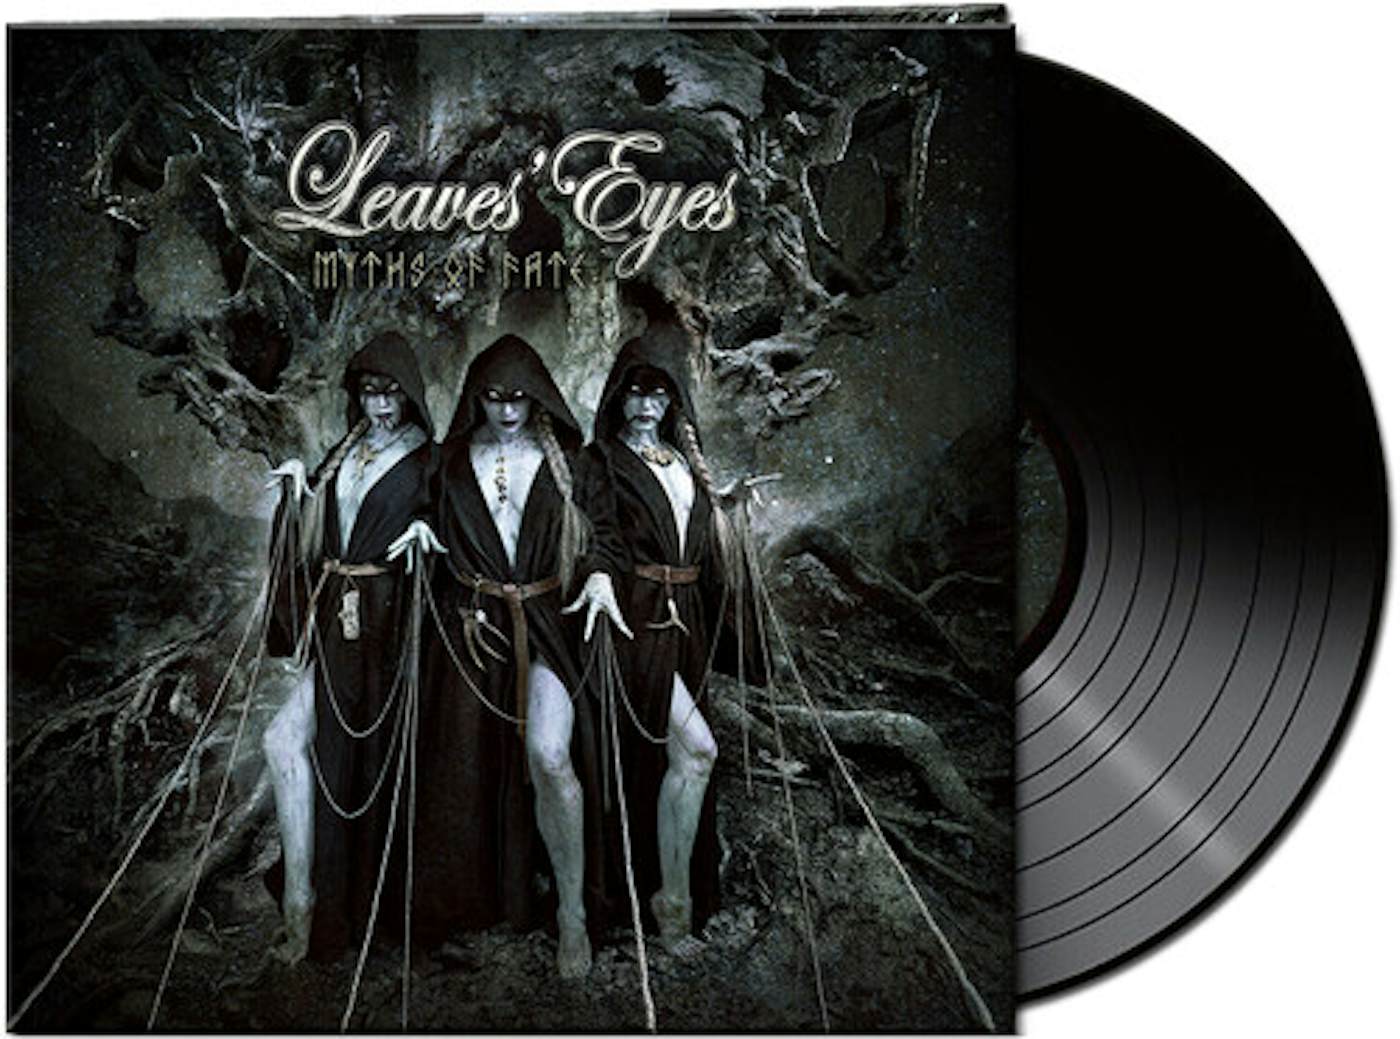 Leaves' Eyes MYTHS OF FATE Vinyl Record